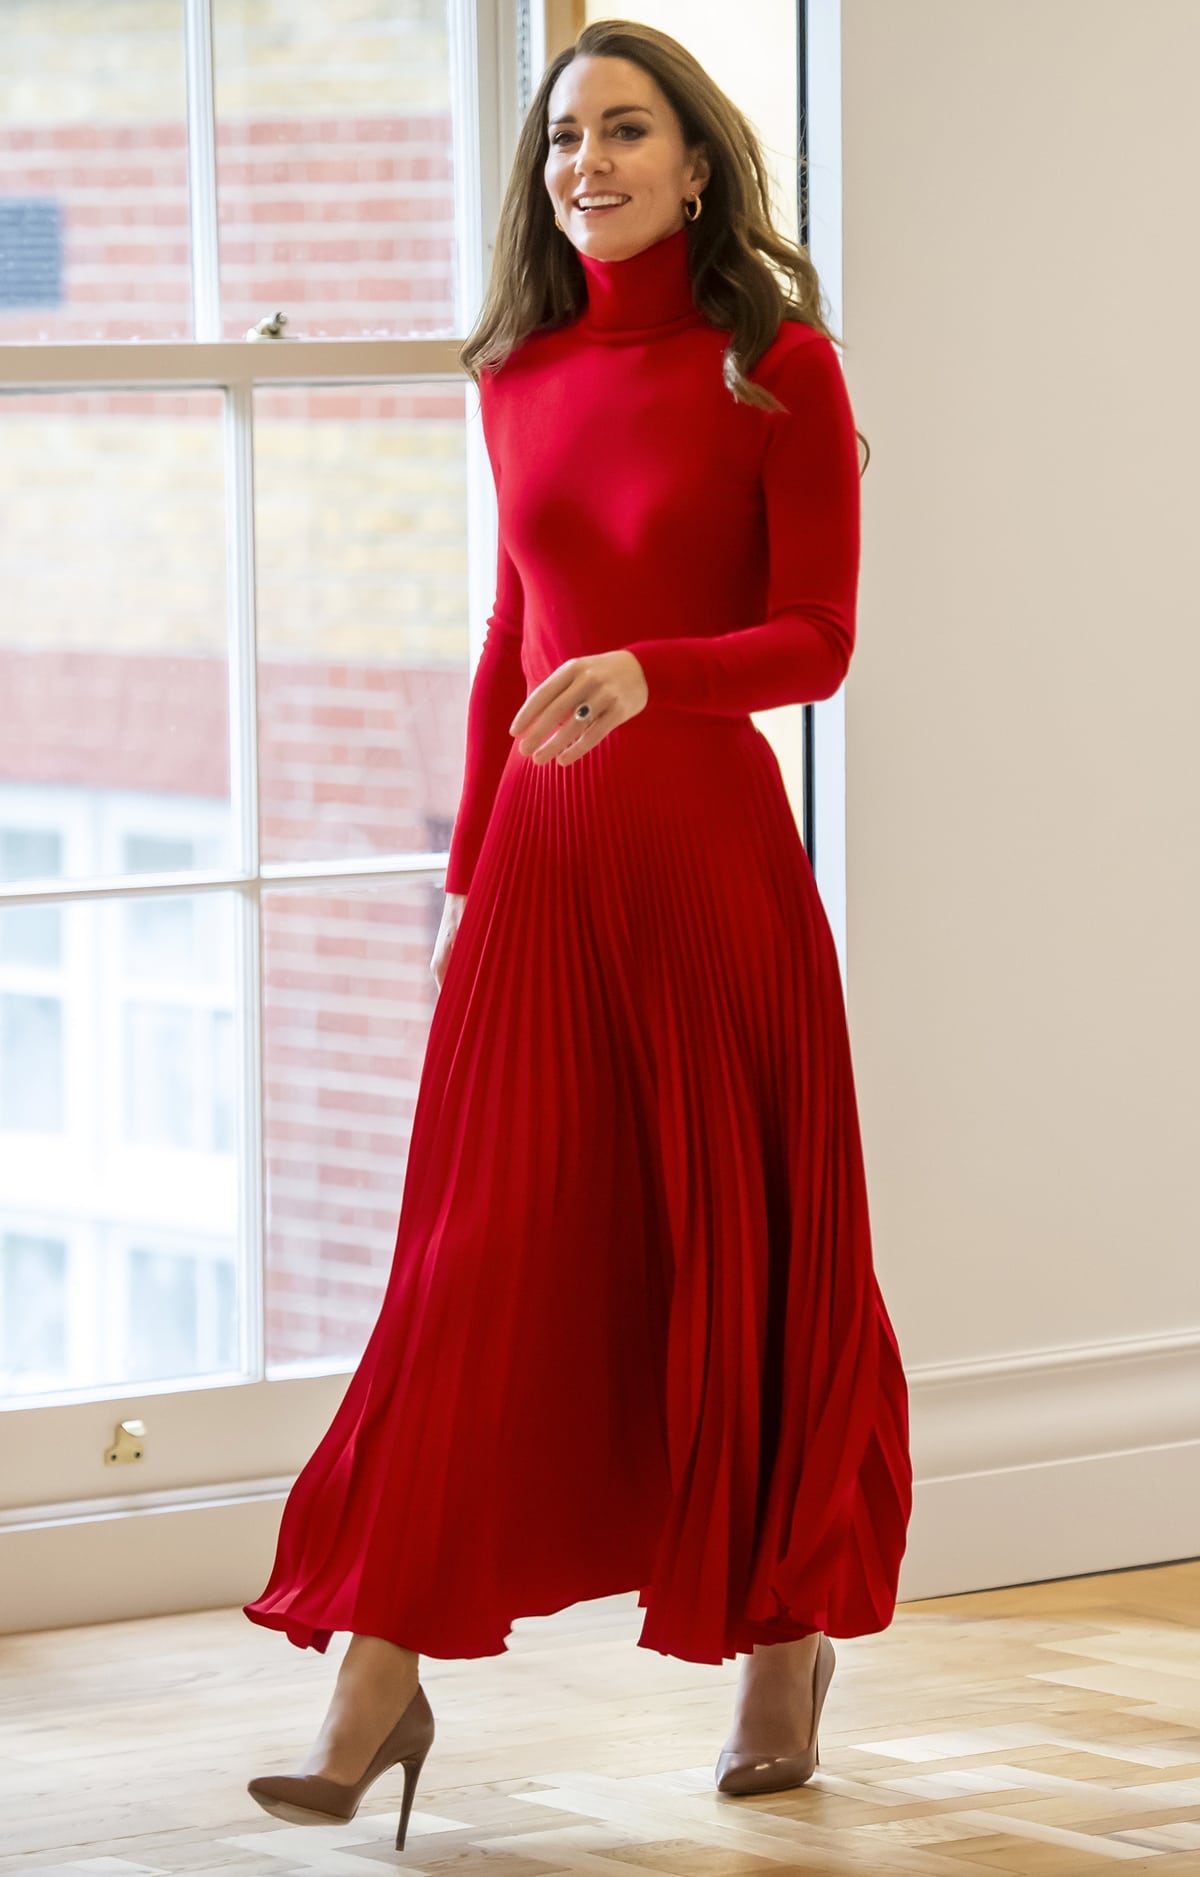 The Duchess of Cambridge wore a red turtleneck sweater from Ralph Lauren with a pleated skirt from Christopher Kane